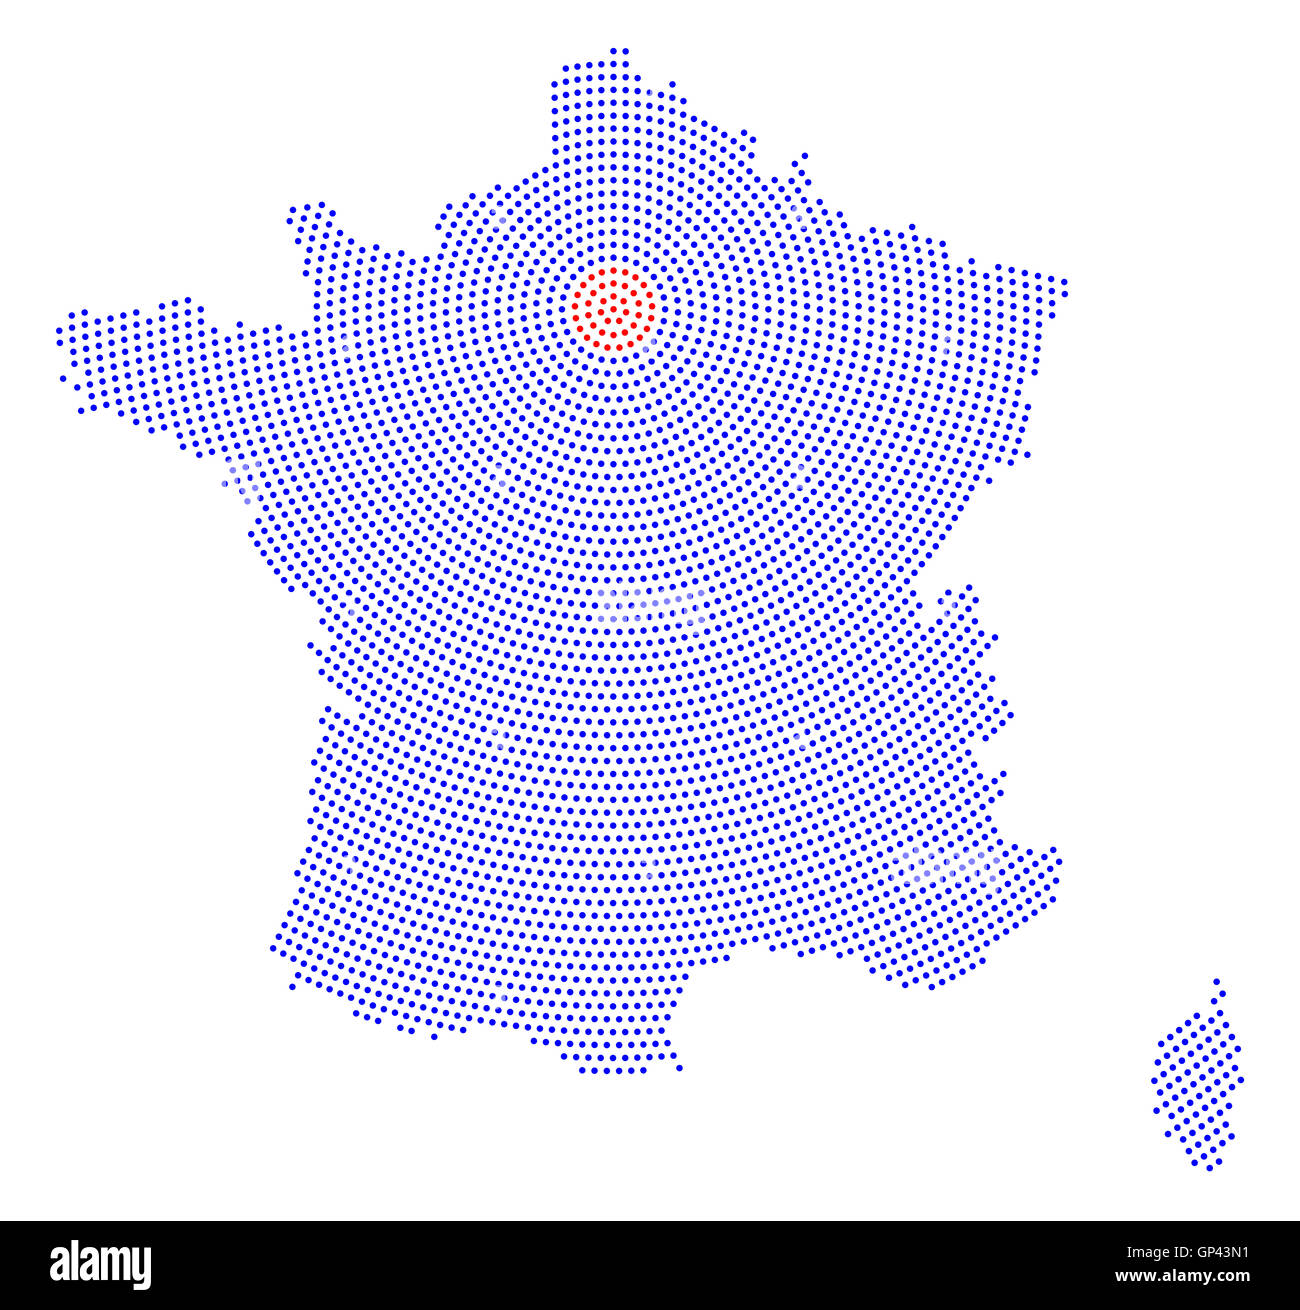 France map radial dot pattern. Blue dots going from the capital Paris outwards and form the hexagon silhouette of France. Stock Photo